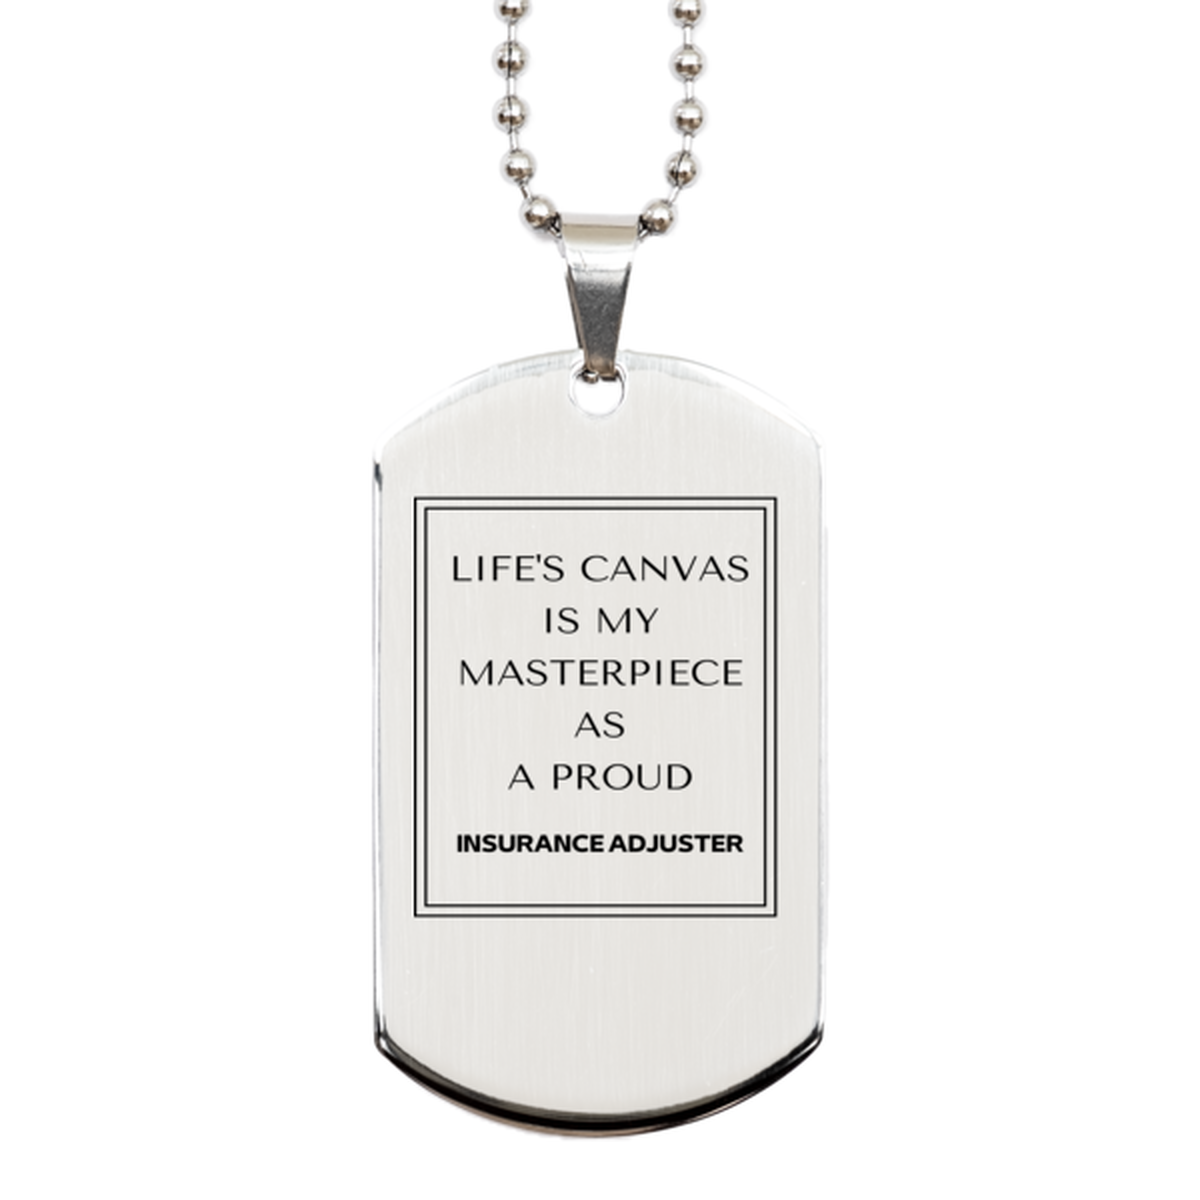 Proud Insurance Adjuster Gifts, Life's canvas is my masterpiece, Epic Birthday Christmas Unique Silver Dog Tag For Insurance Adjuster, Coworkers, Men, Women, Friends